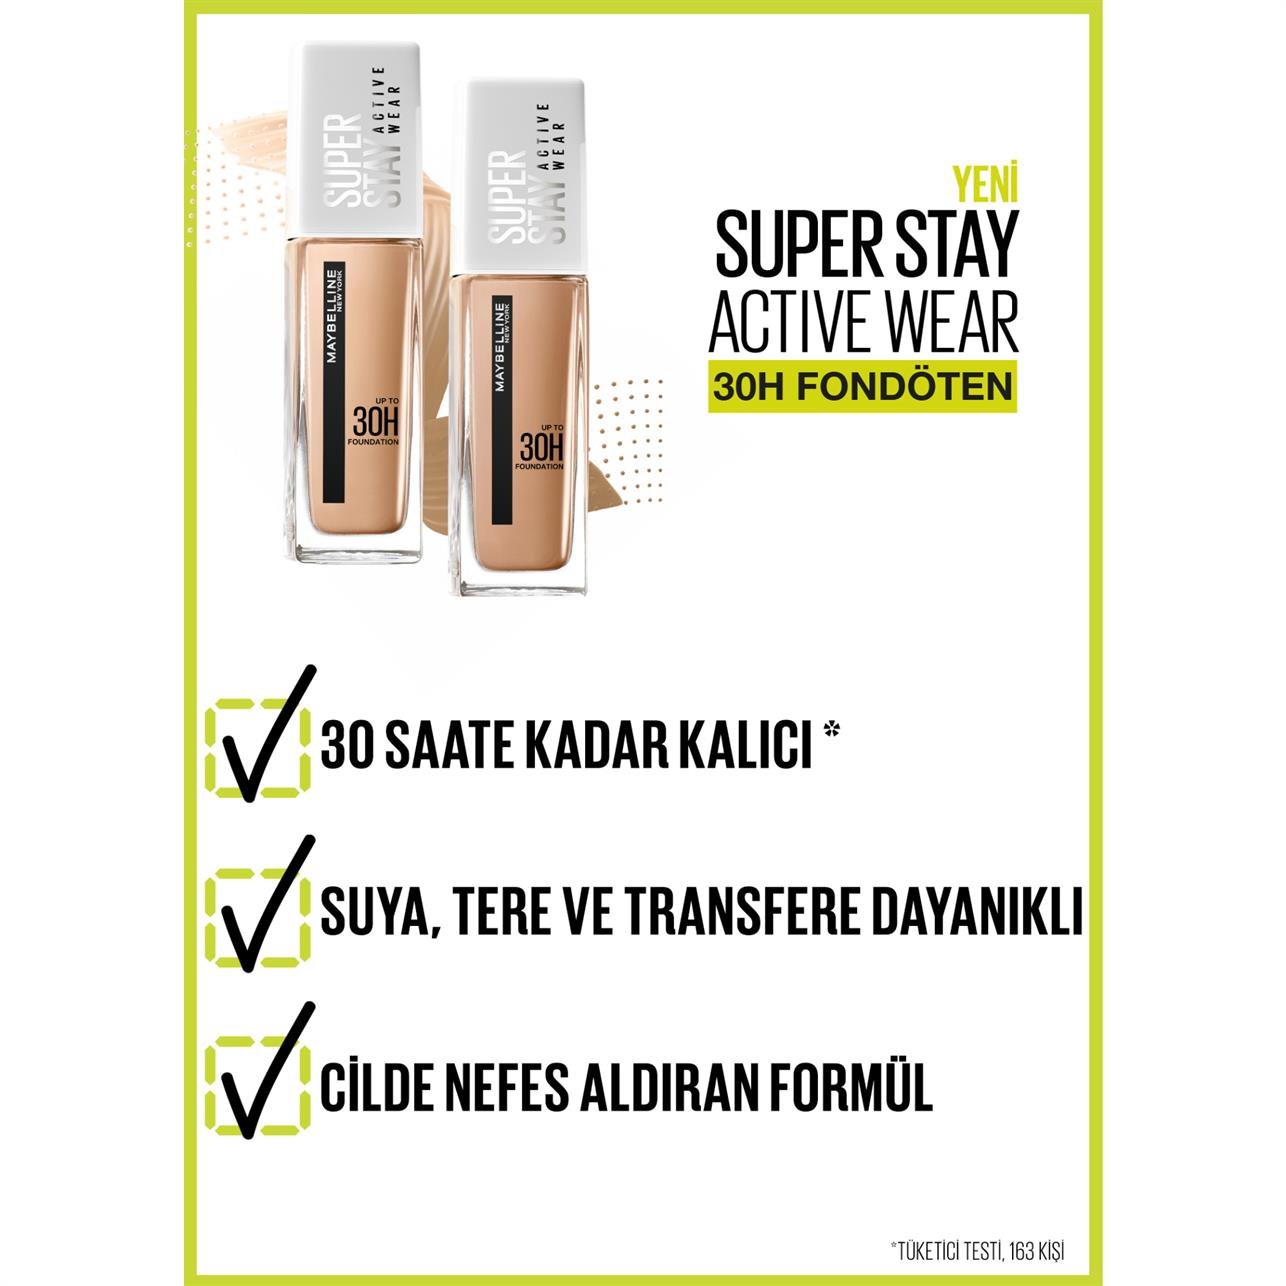 Maybelline New York Super Nude Fondöten 30H No:40 Fawn Wear Platin - Active Stay